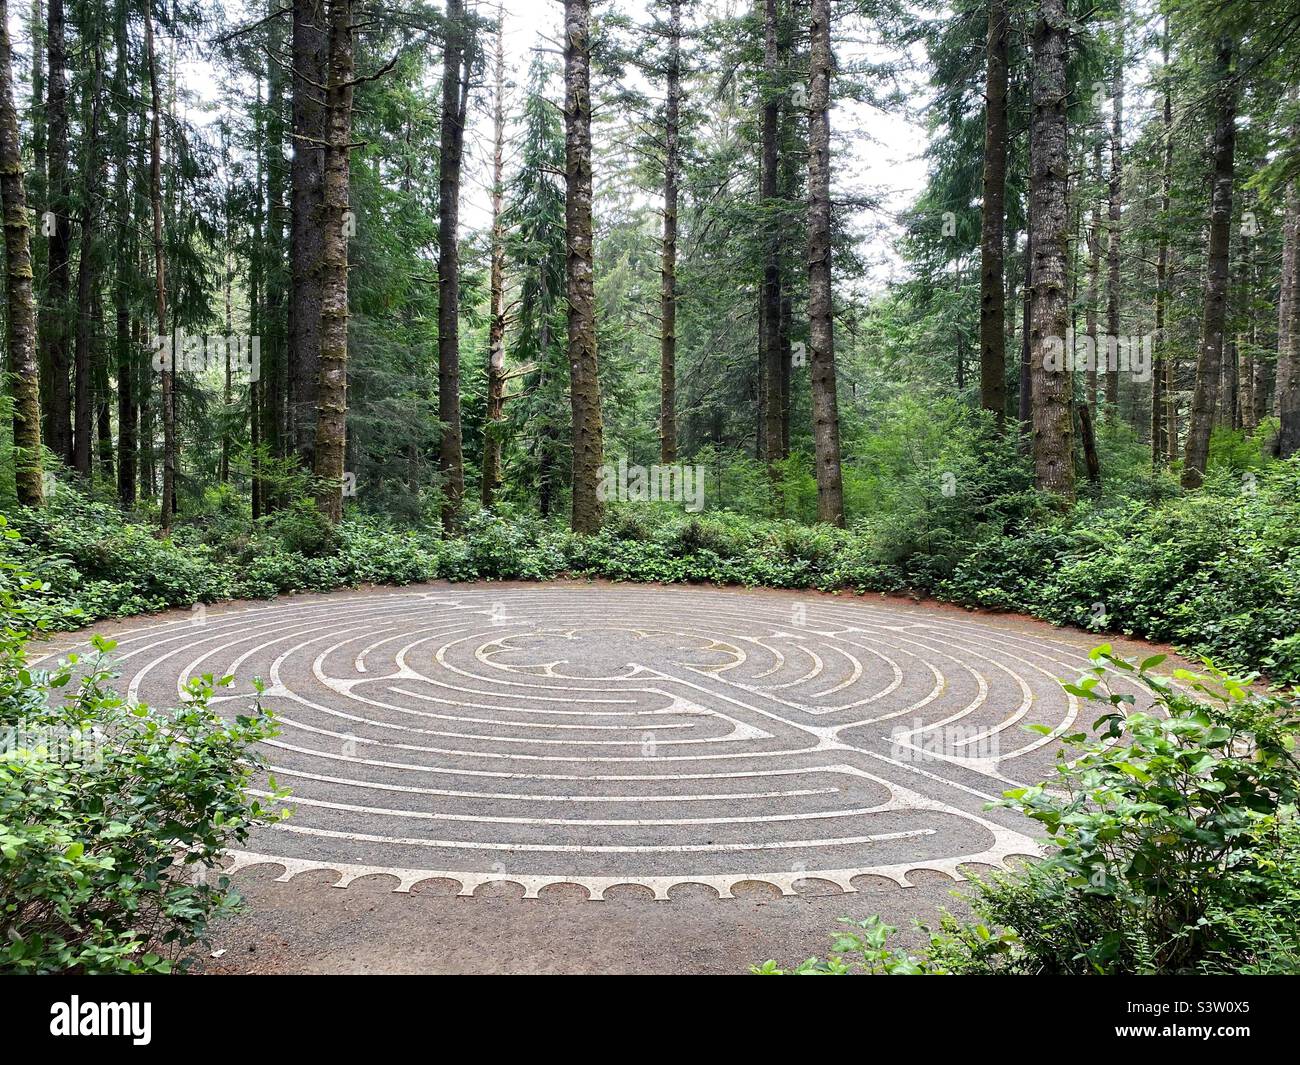 A labyrinth in a forest. Stock Photo